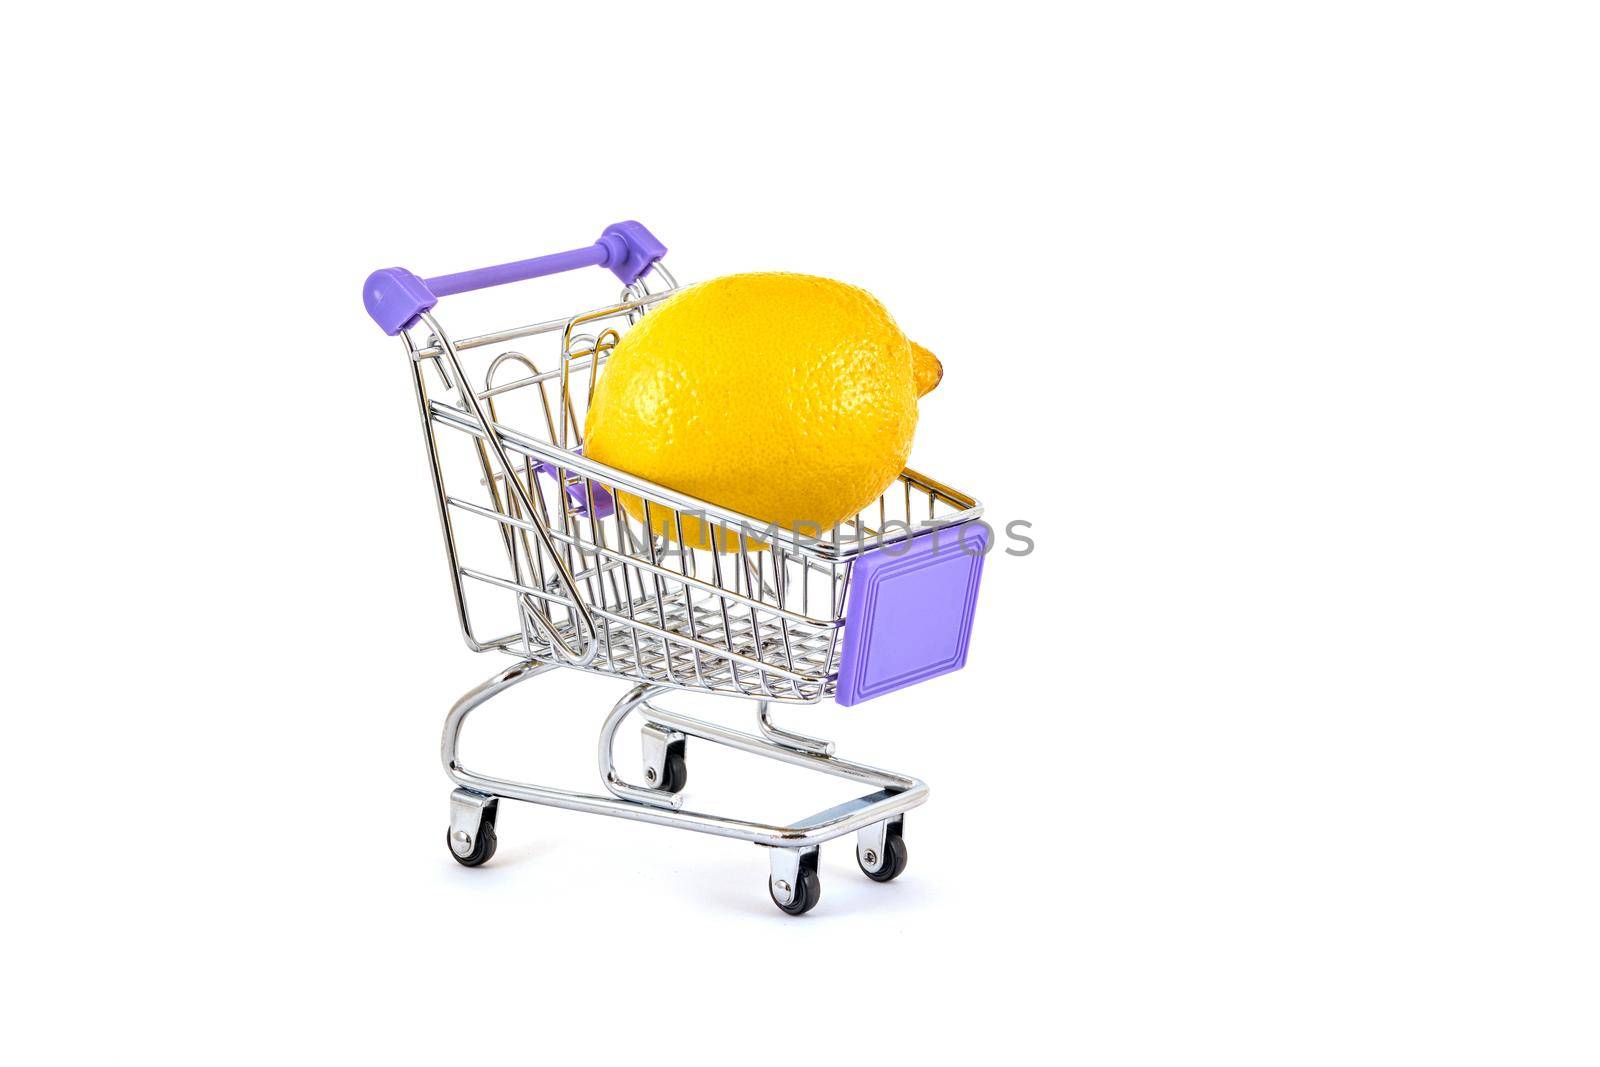 Yellow lemon in a supermarket trolley on a white background by vizland